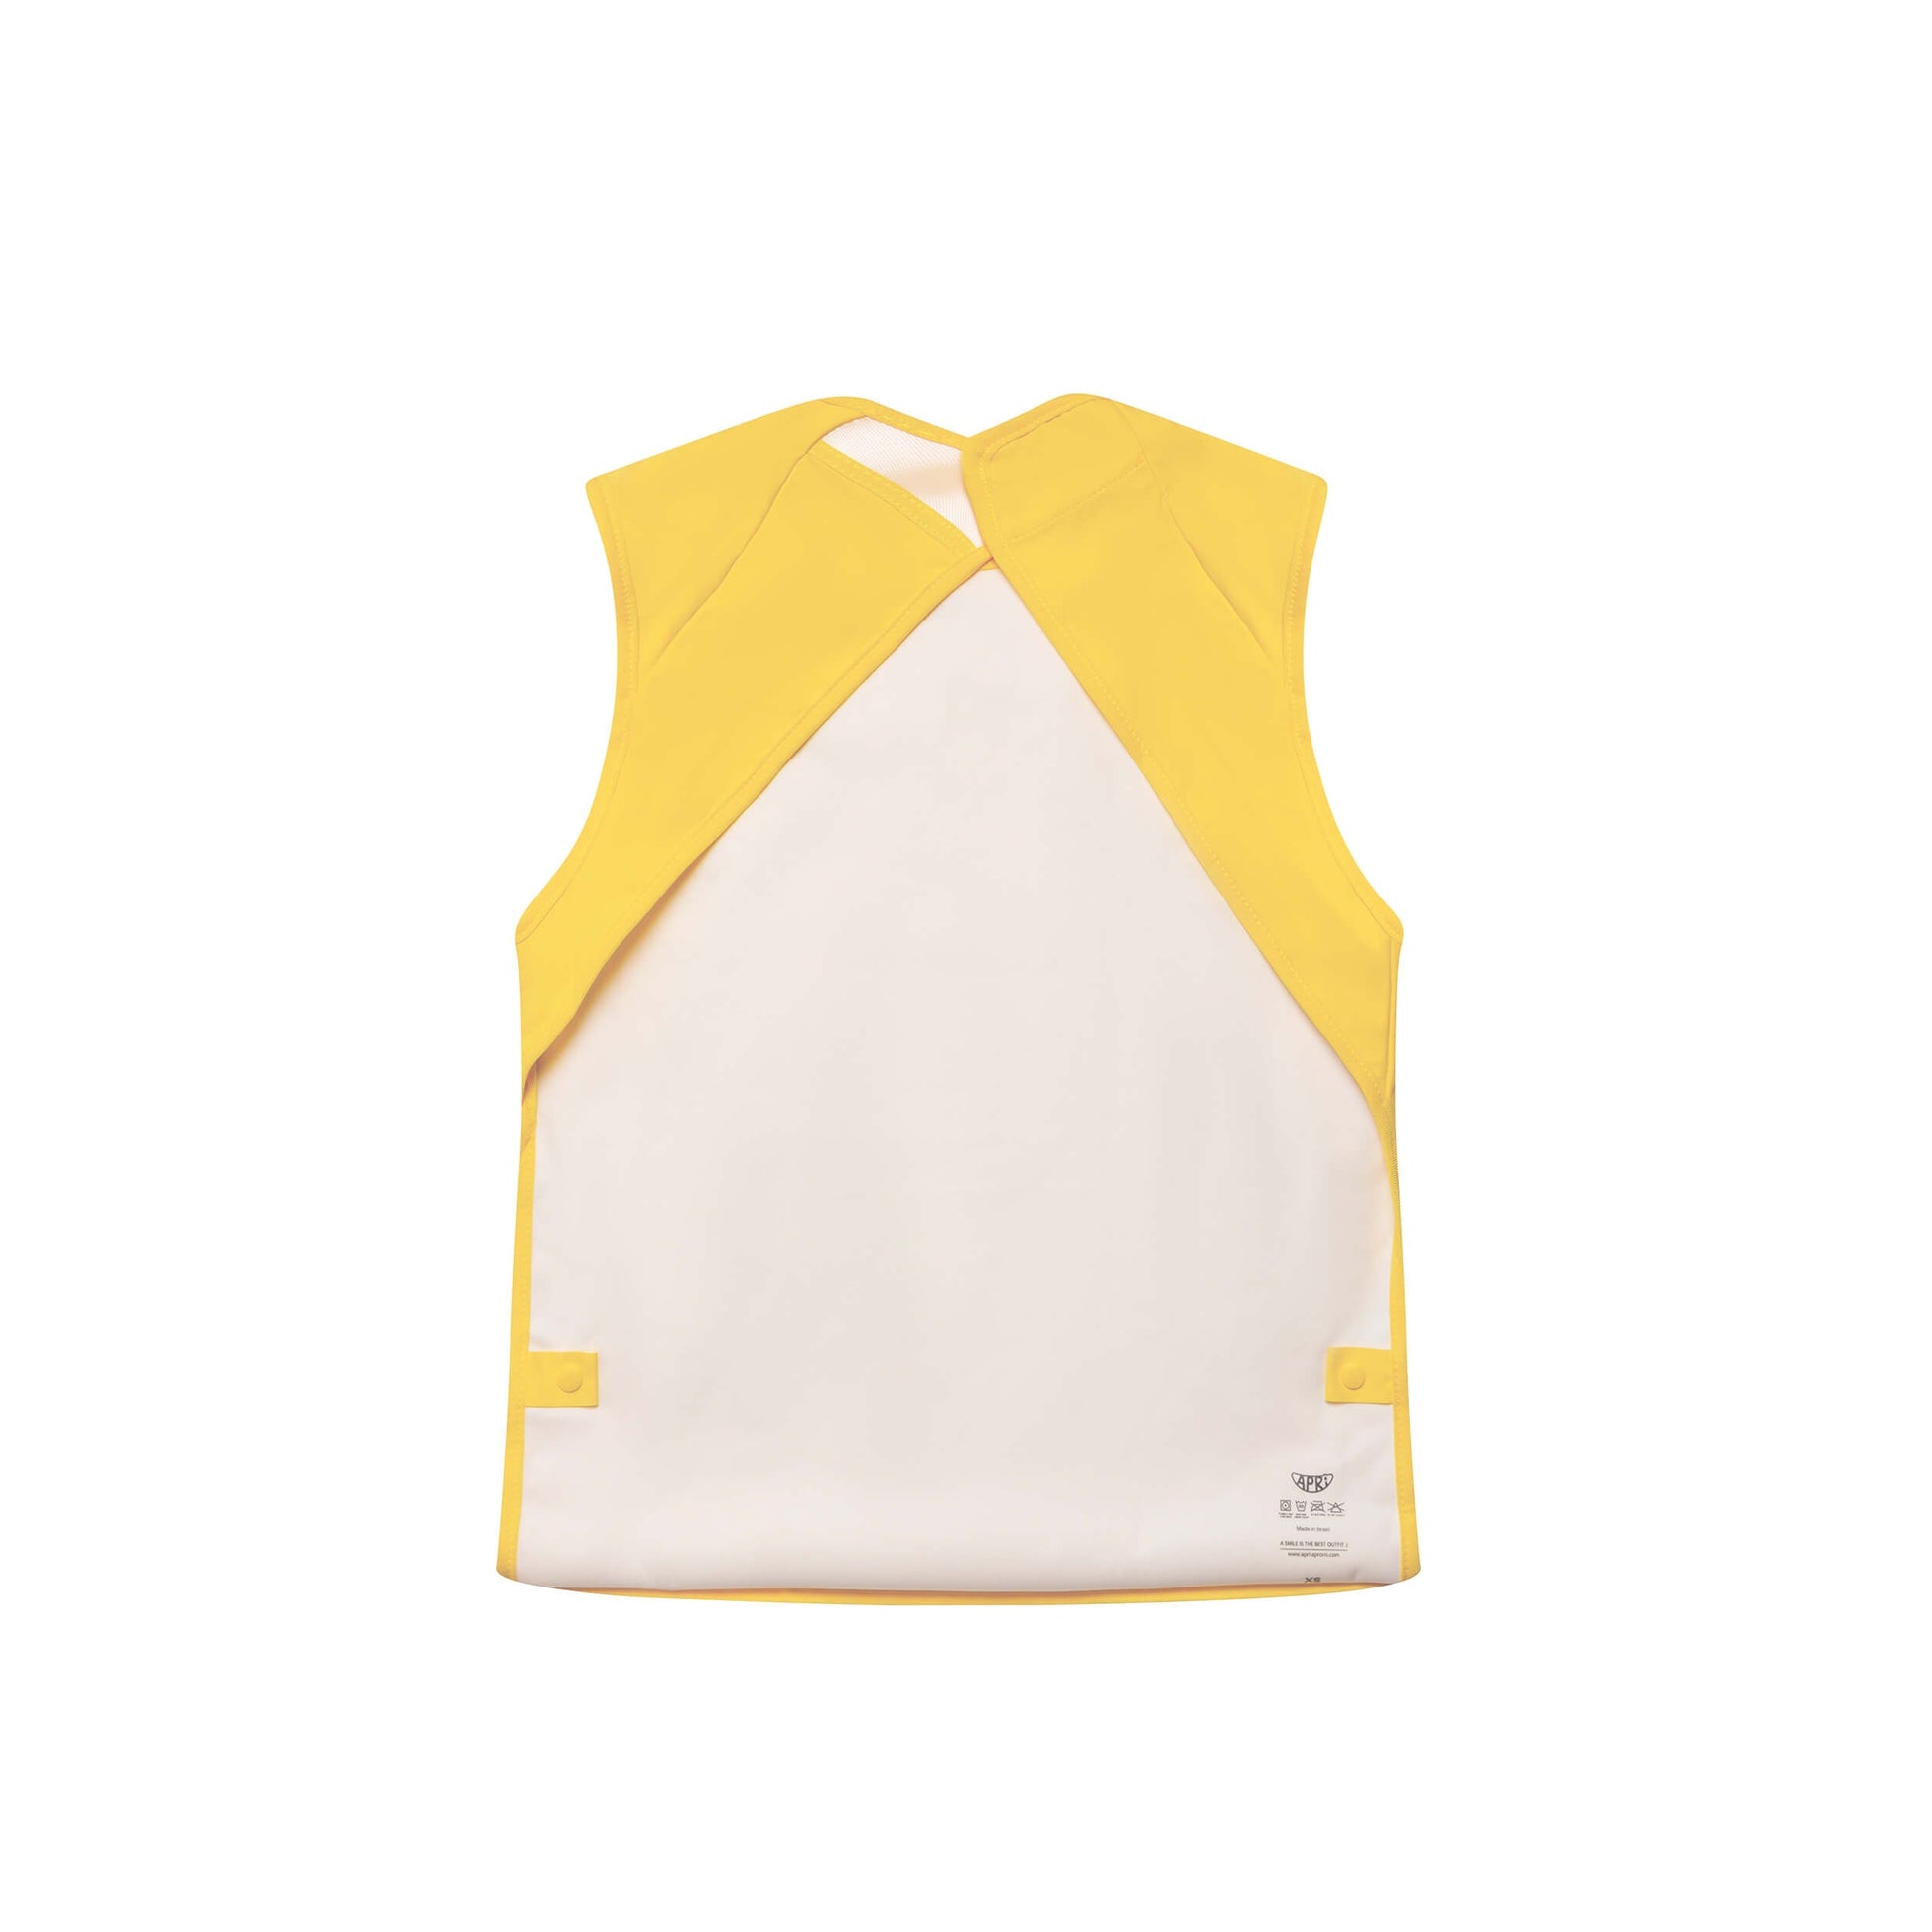 Apri special needs bib for kids, teens and adults.  Sunshine yellow wth silicone injected fastener cap sleeves